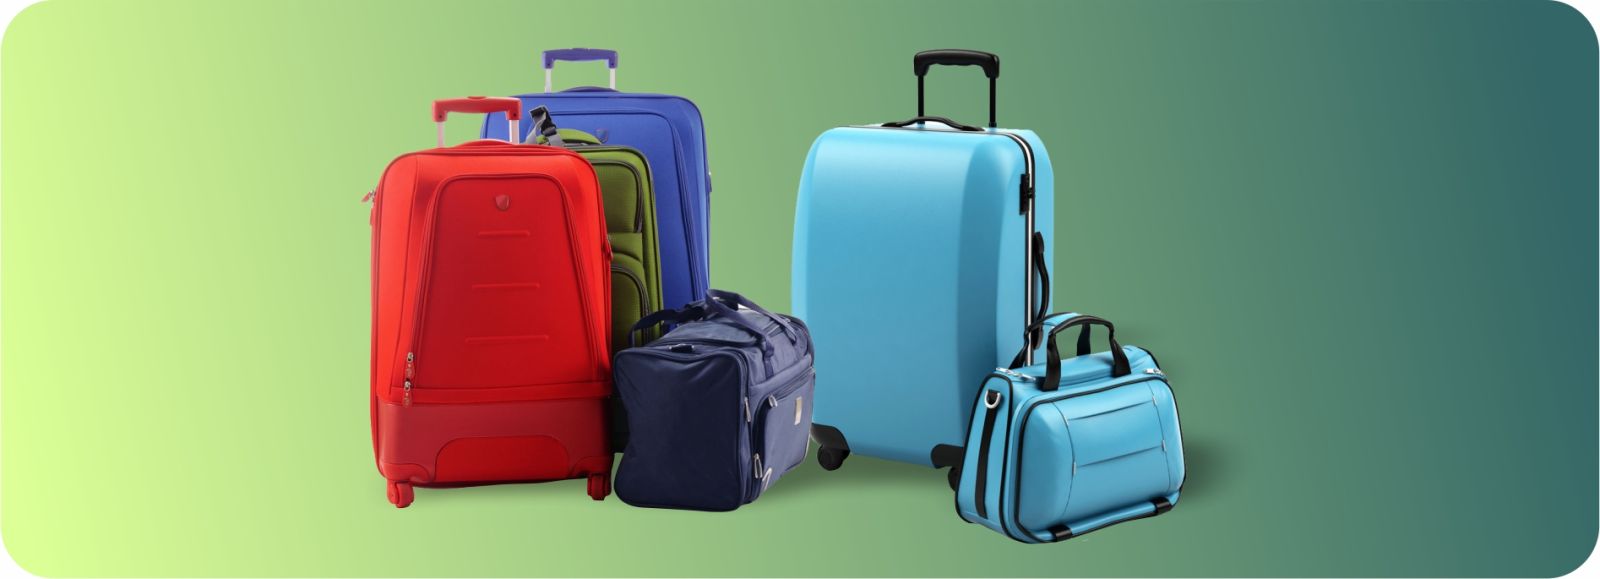 Luggage and Travel Bags